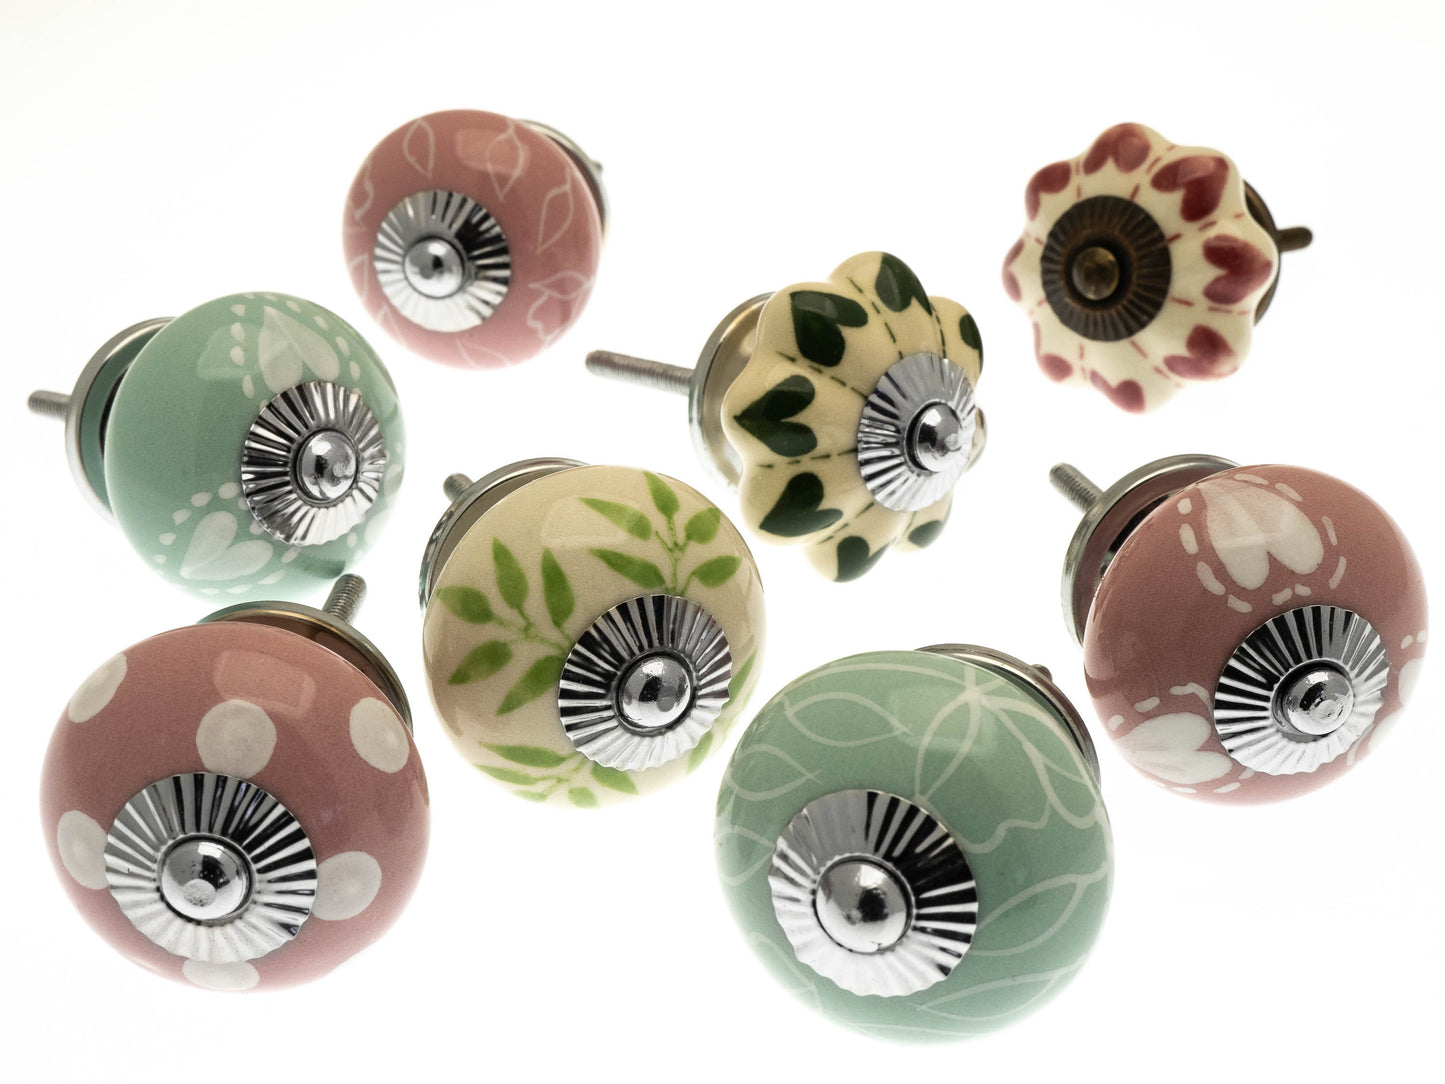 Ceramic Door Knobs Hand Painted in Pastel Pinks and Greens (Set of 8)